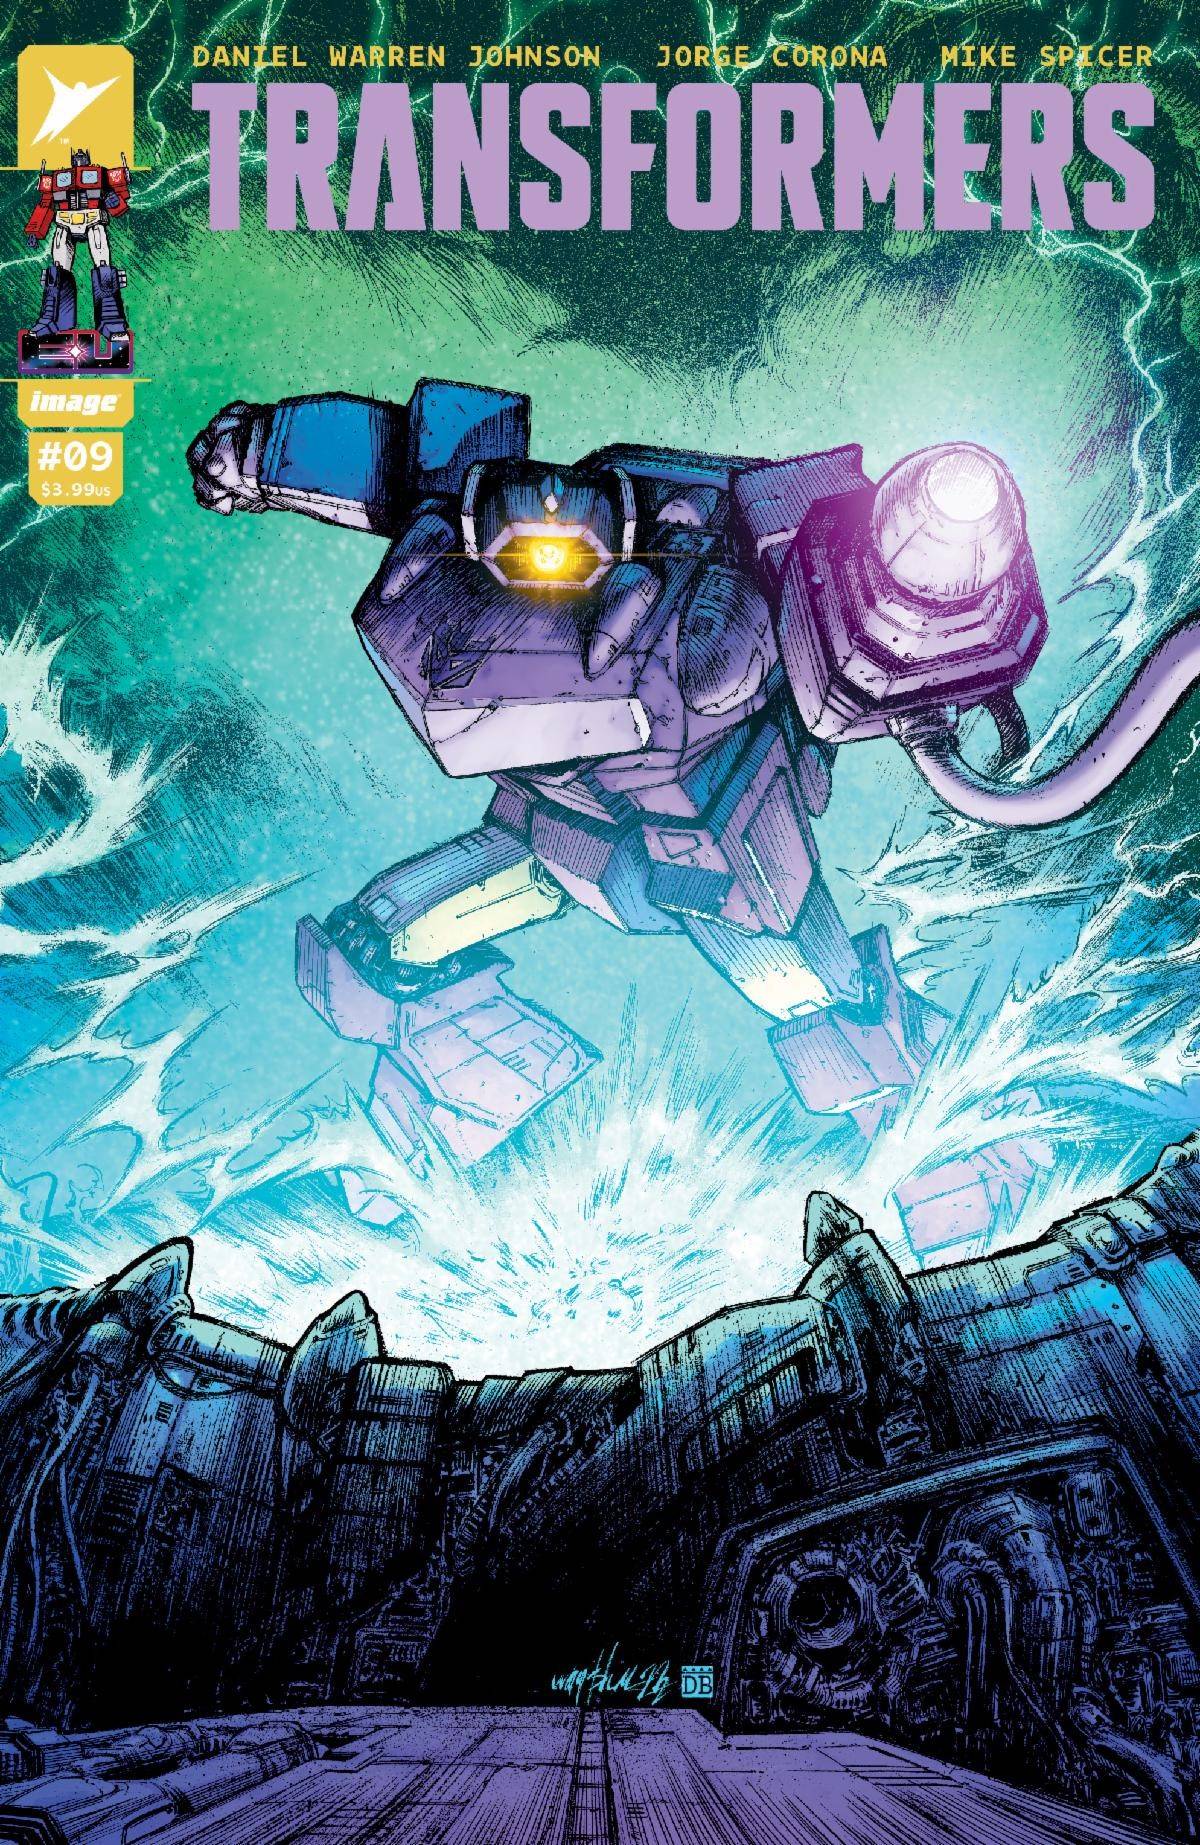 Transformers #9 Cover D 1 in 25 Jonathan Wayshak Variant